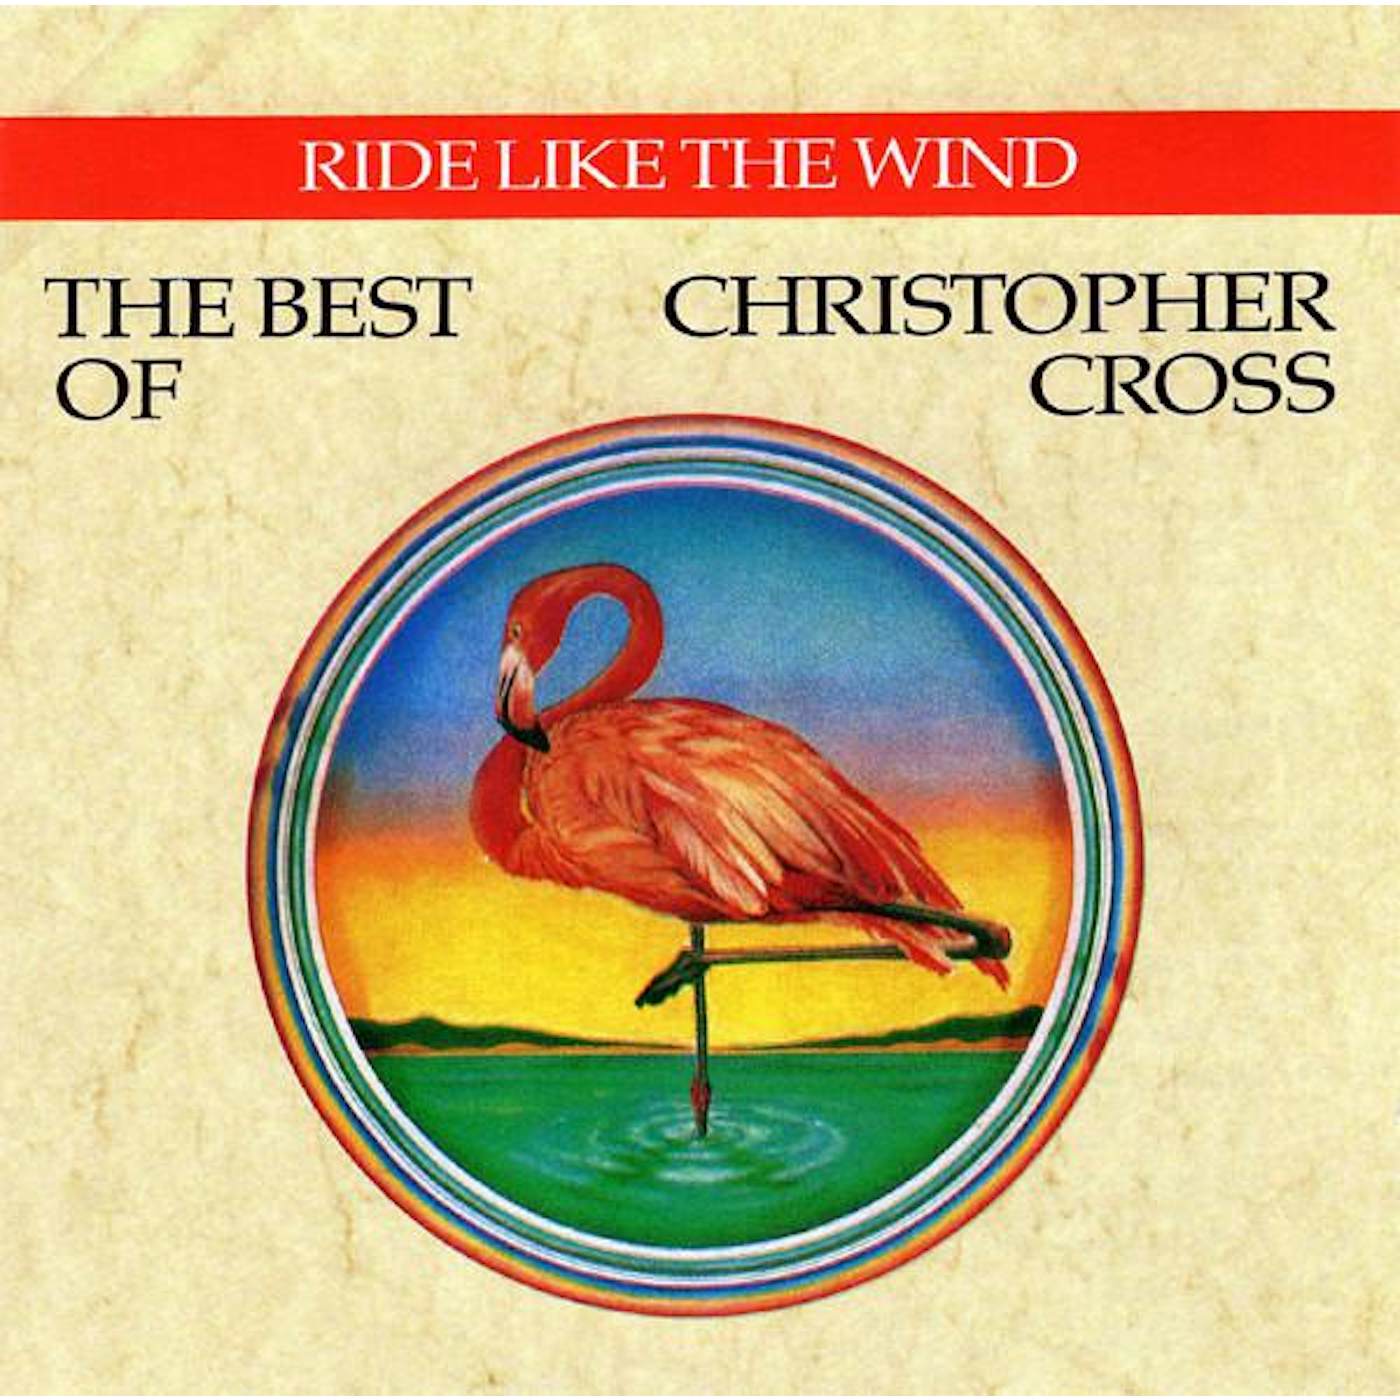 Christopher Cross RIDE LIKE THE WIND - THE BEST CD